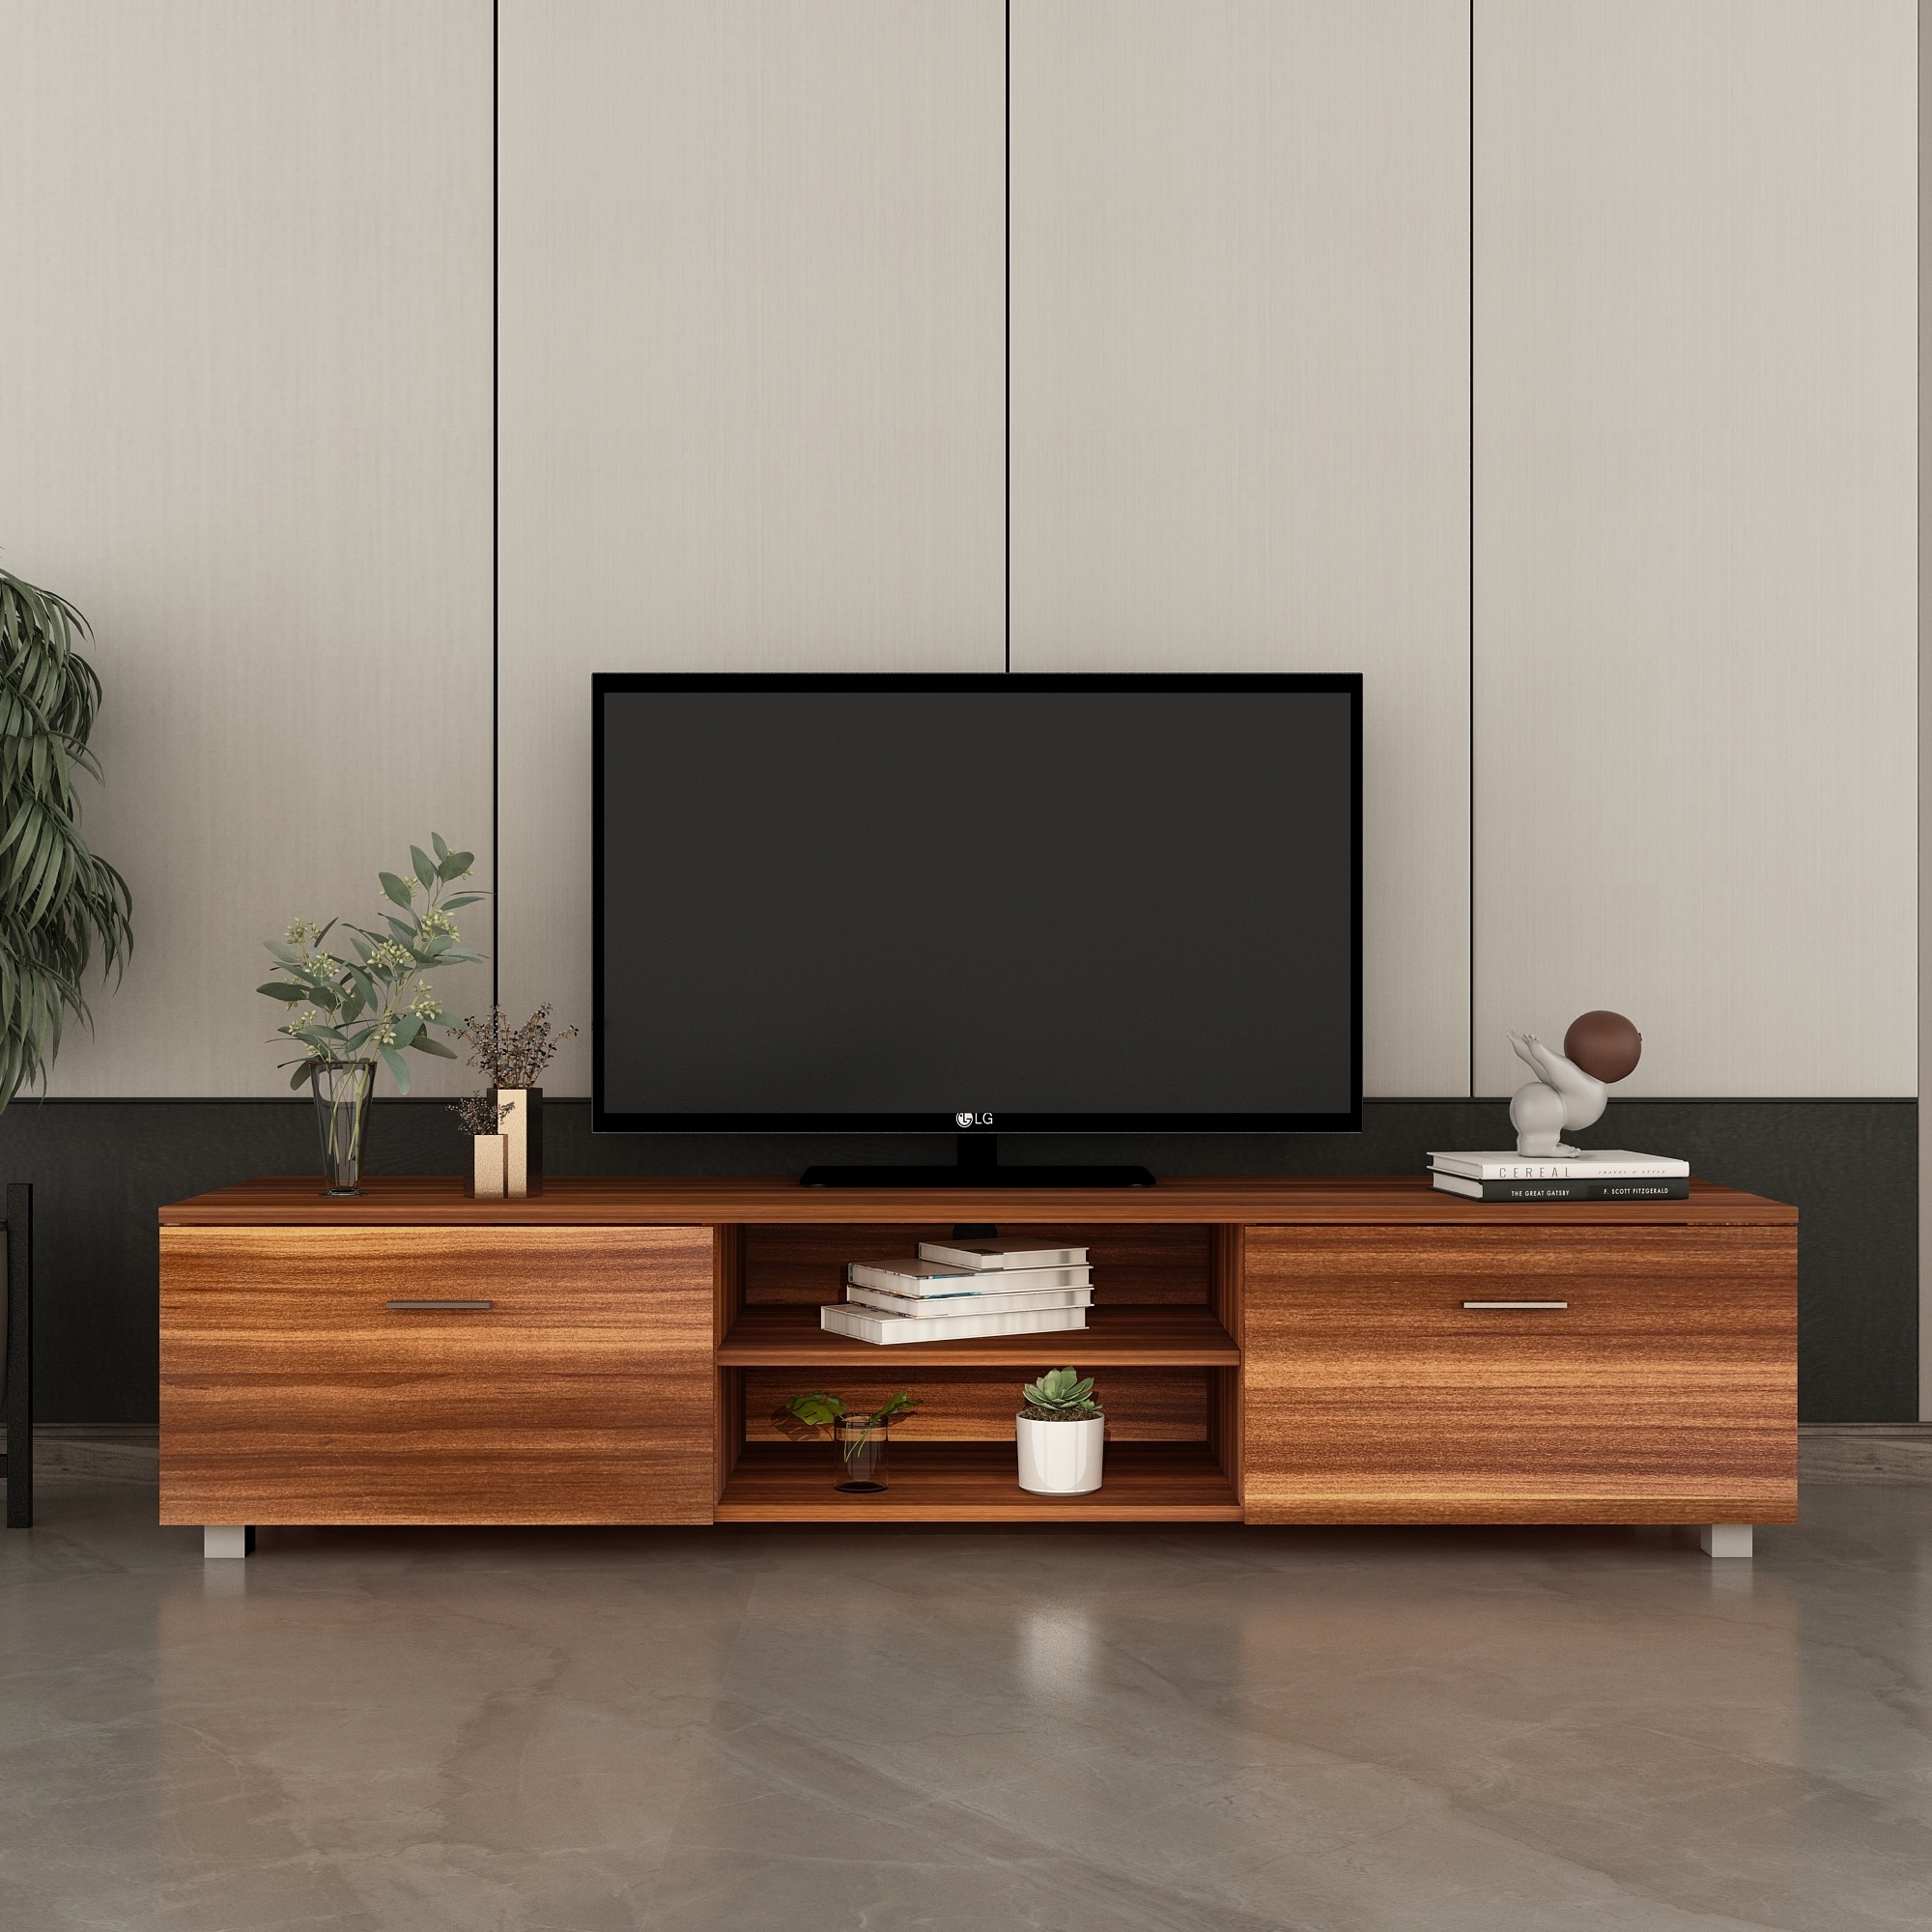 TiramisuBest Modern style TV cabinet for up to 70 inch